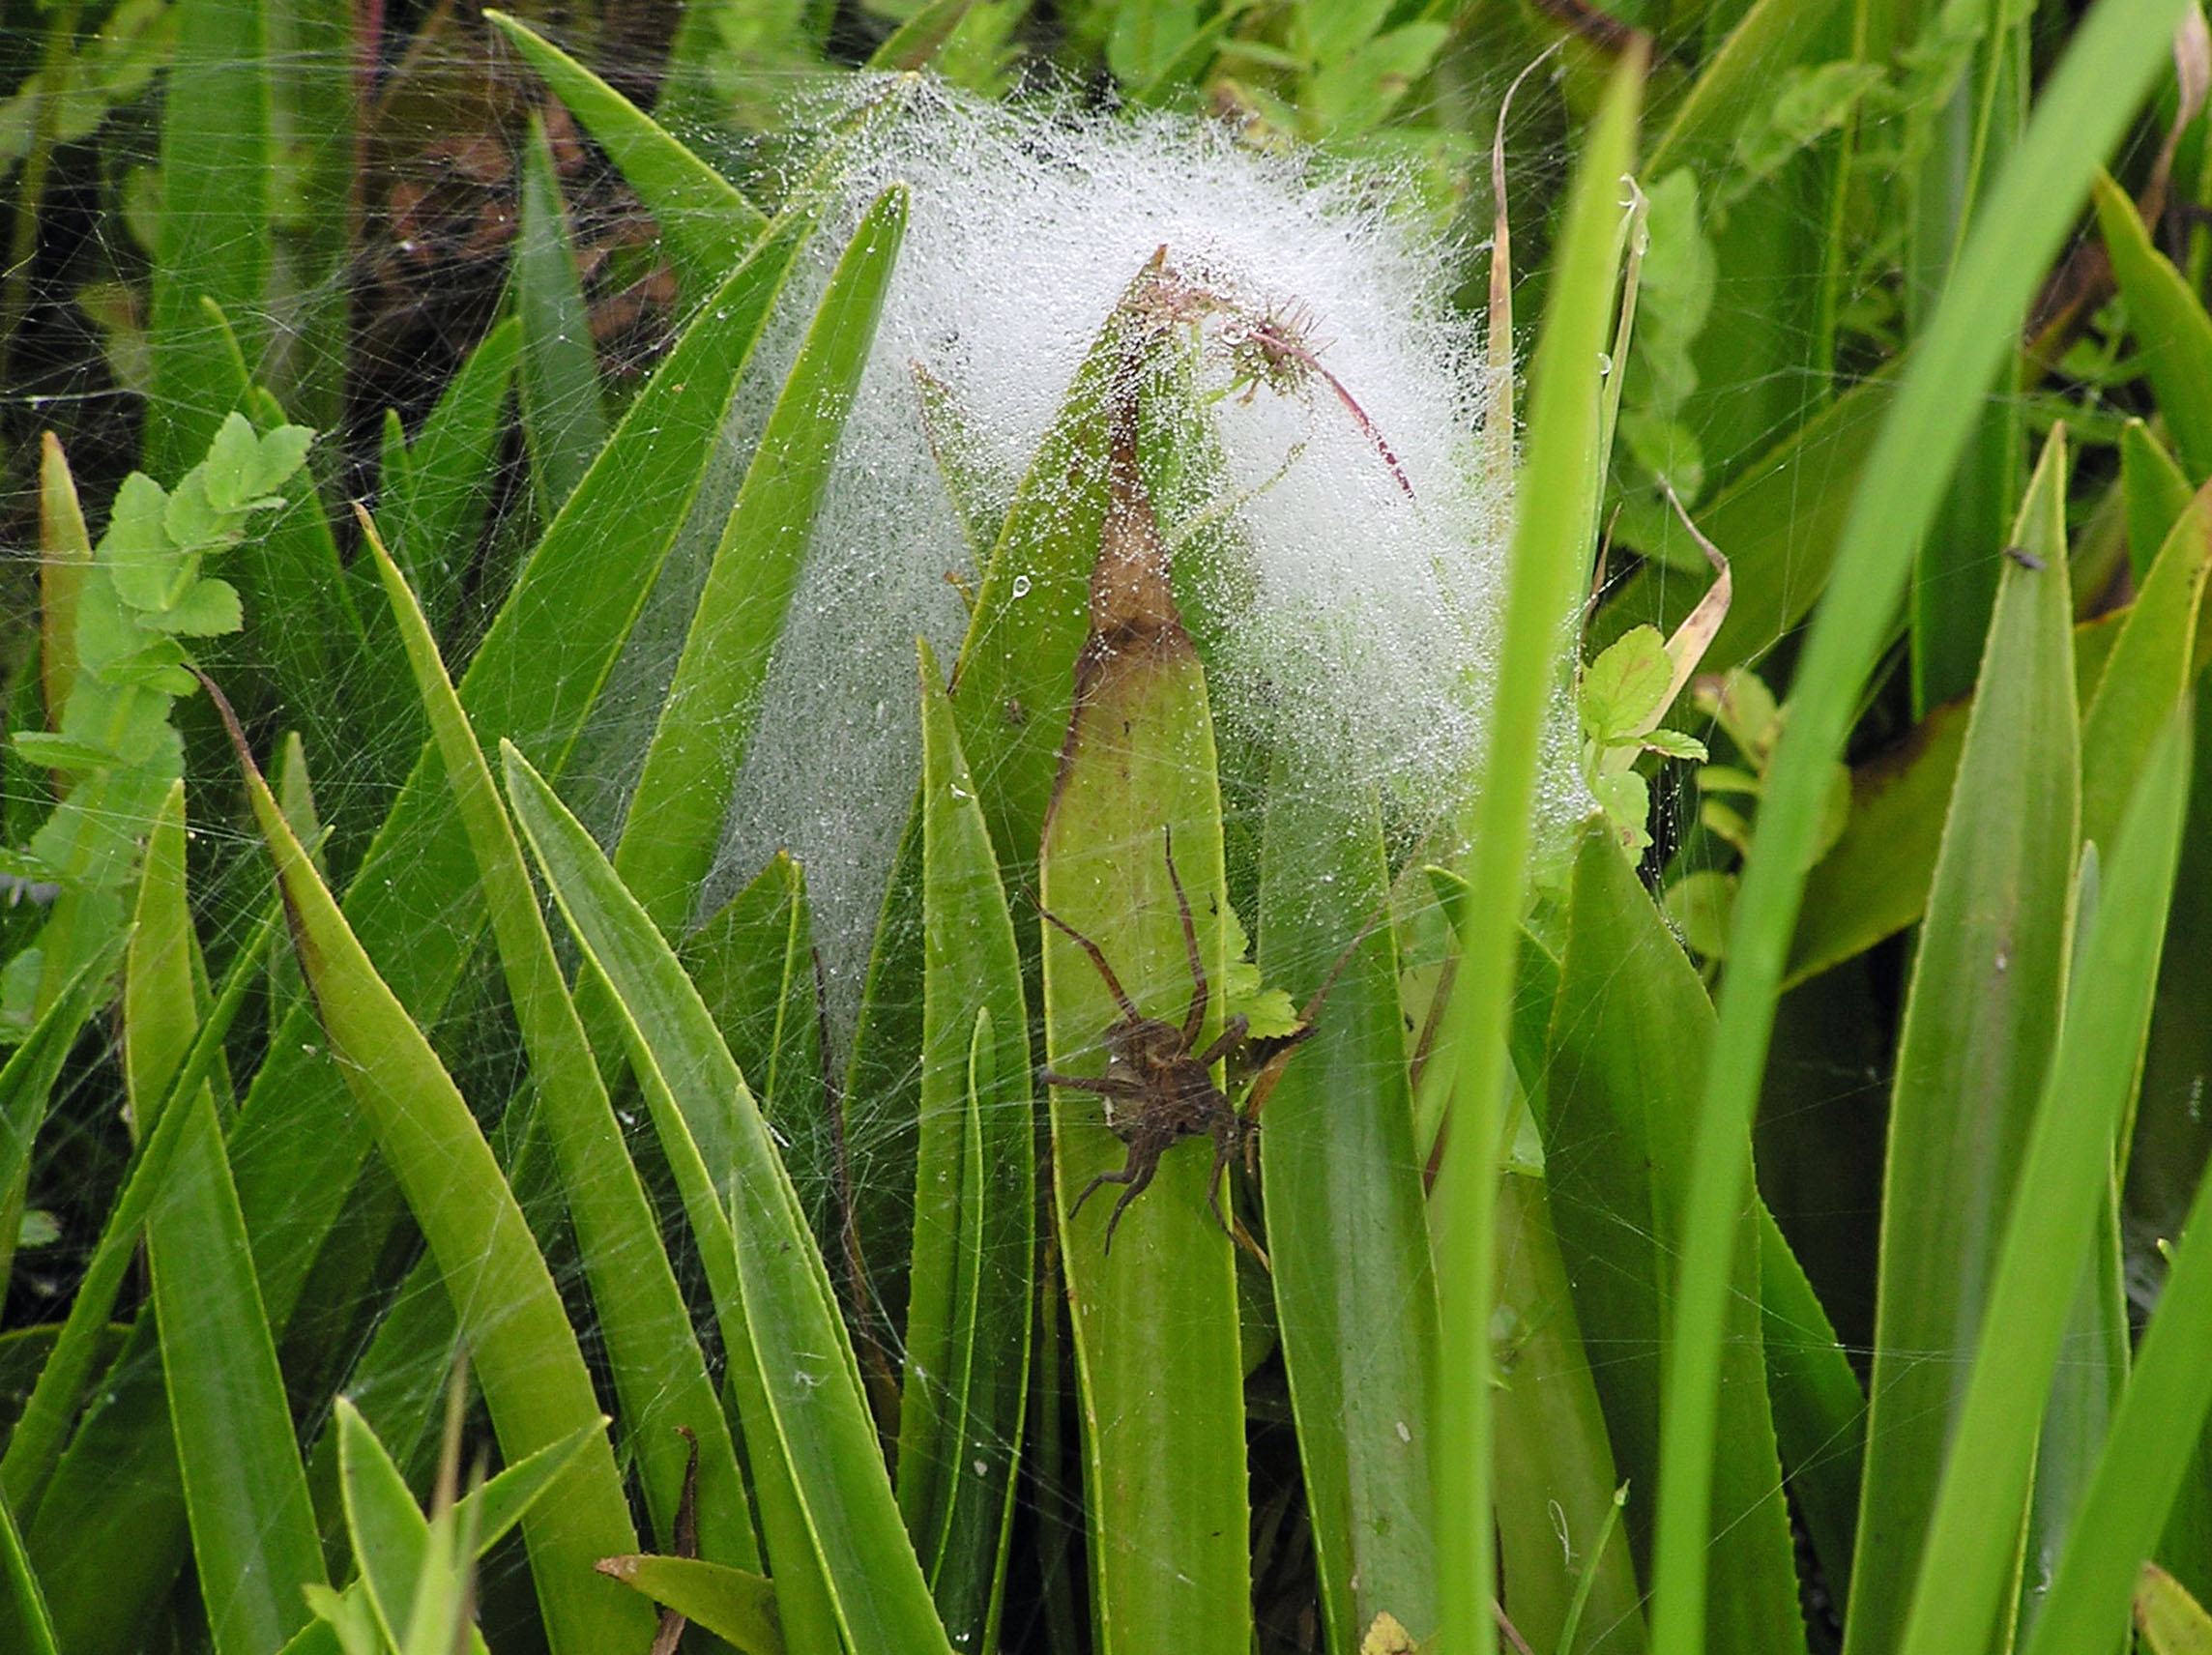 Females with eggs sacs often shelter within the structure of an existing nursery web